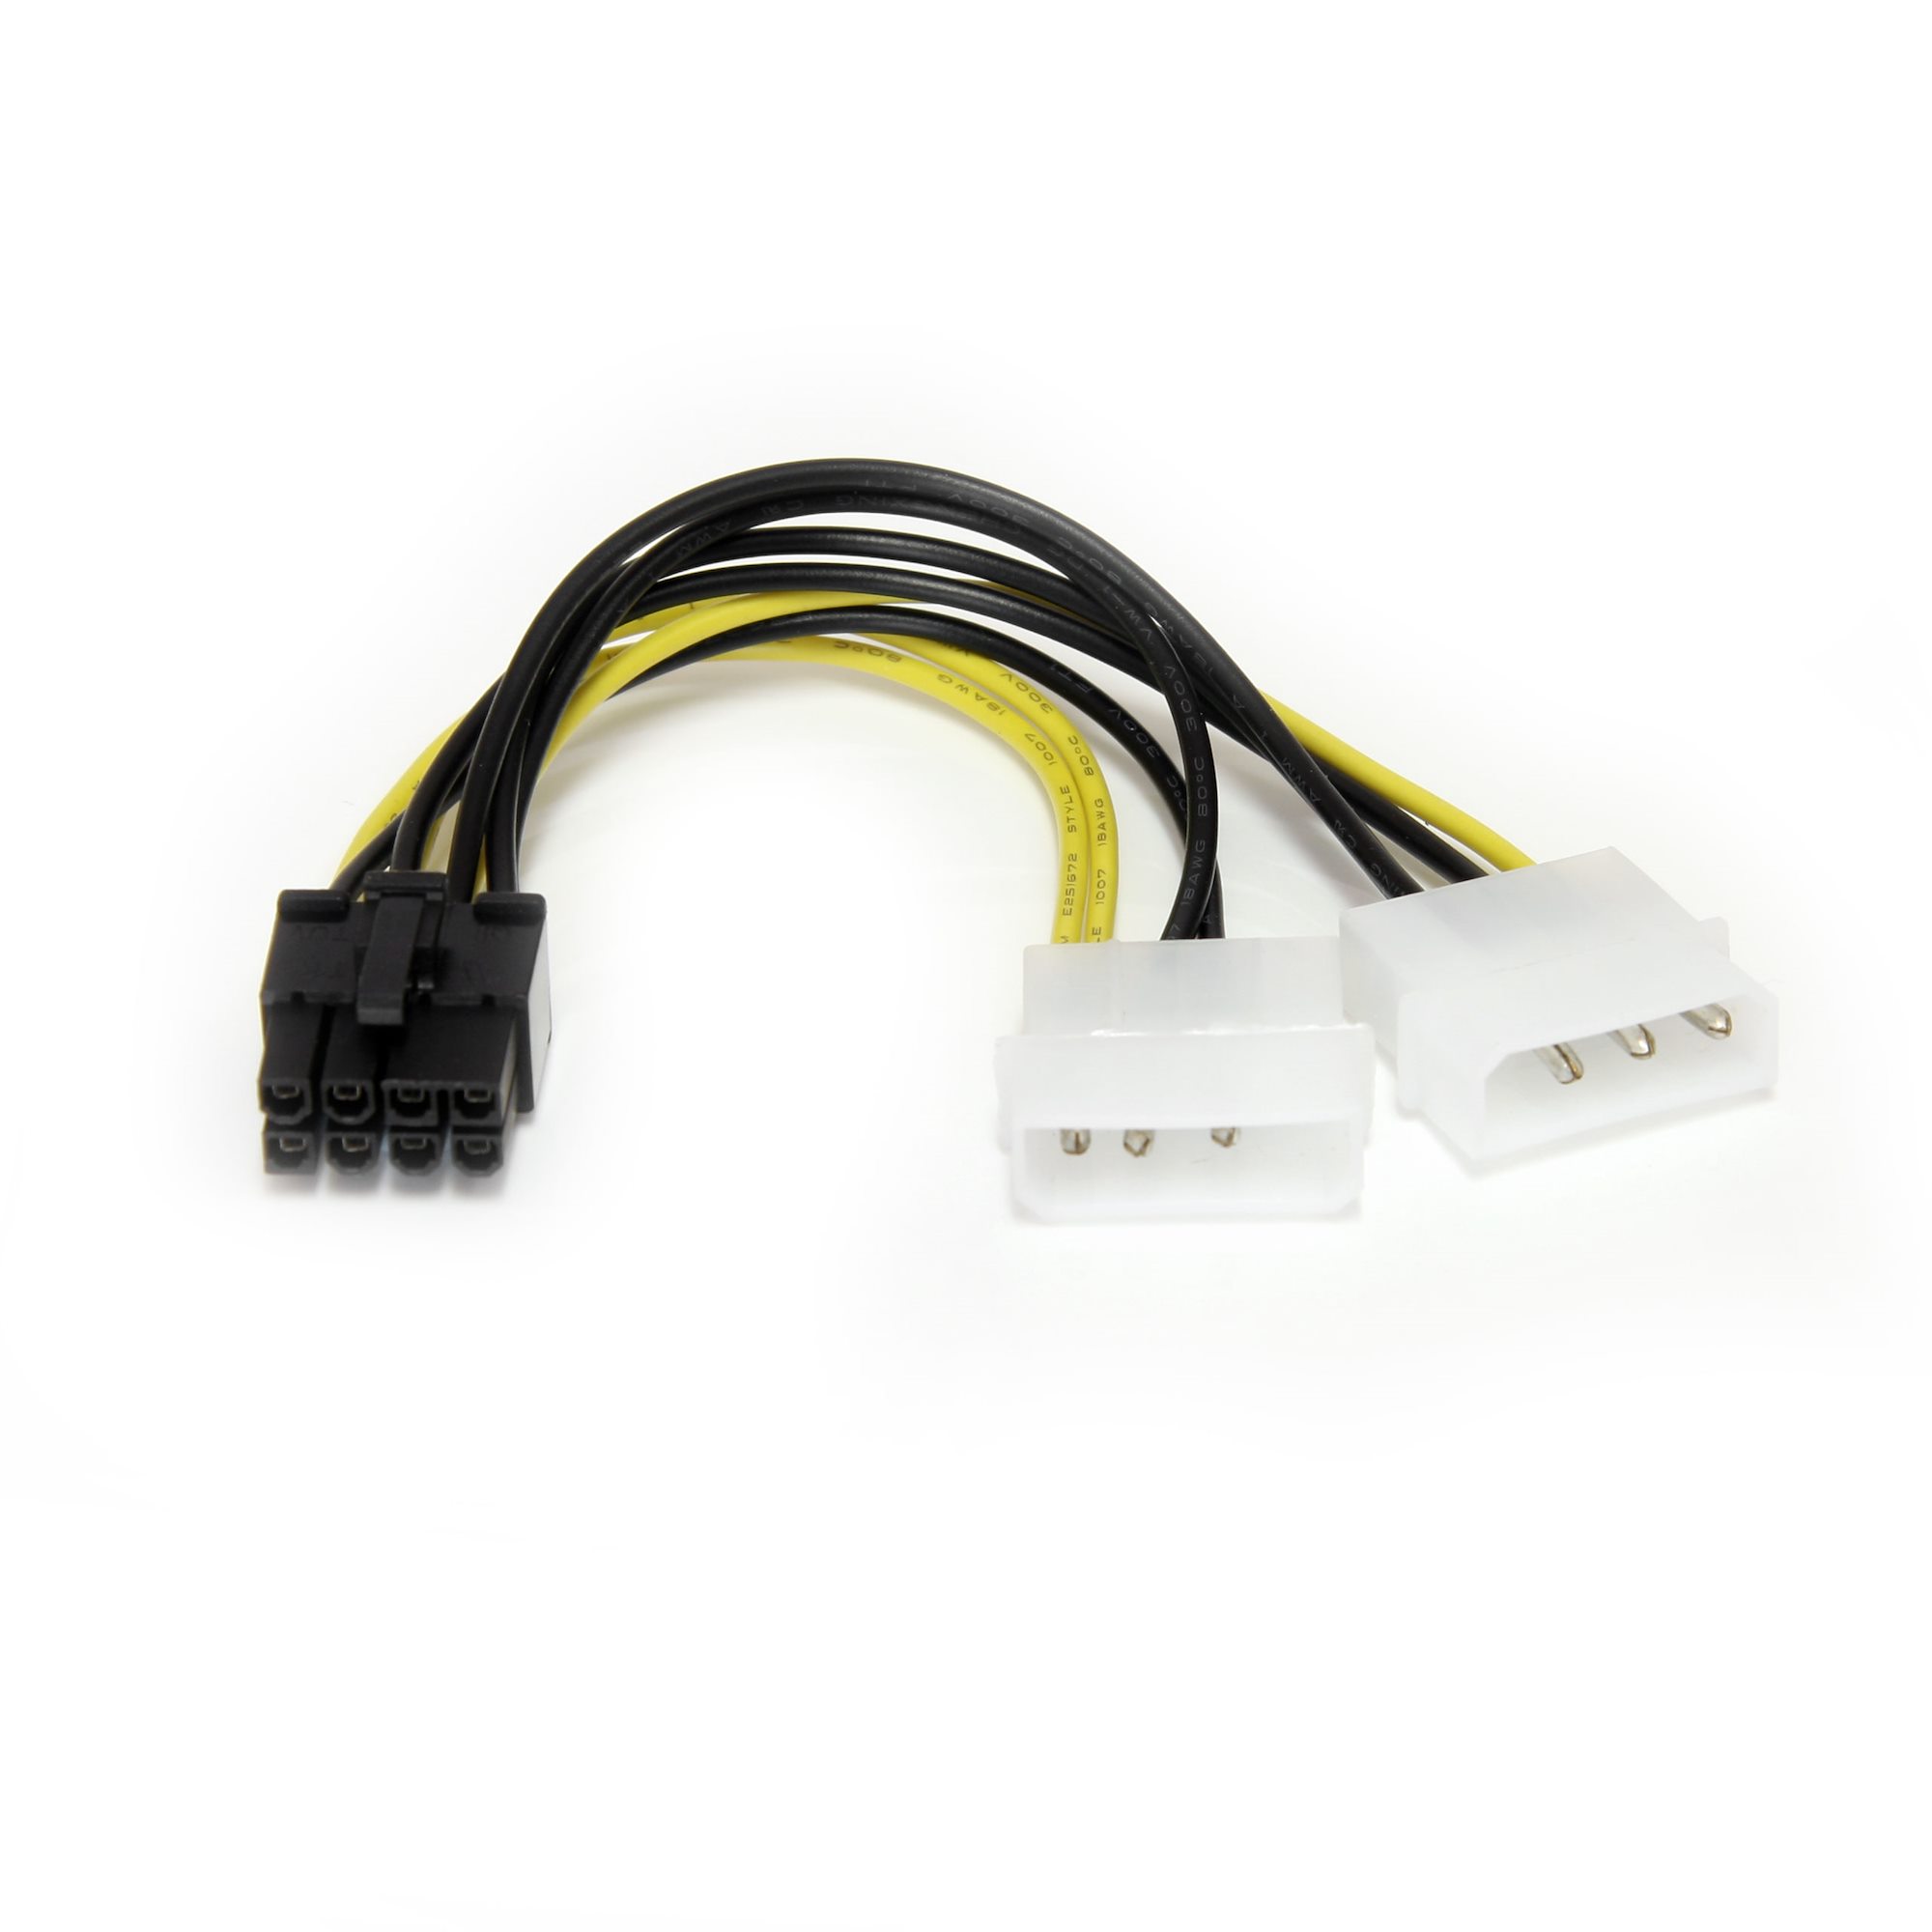 Actuator trolley bus Miscellaneous 6' LP4 to 8 Pin PCIe Power Cable Adapter - Computer Power Cables - Internal  | StarTech.com Europe